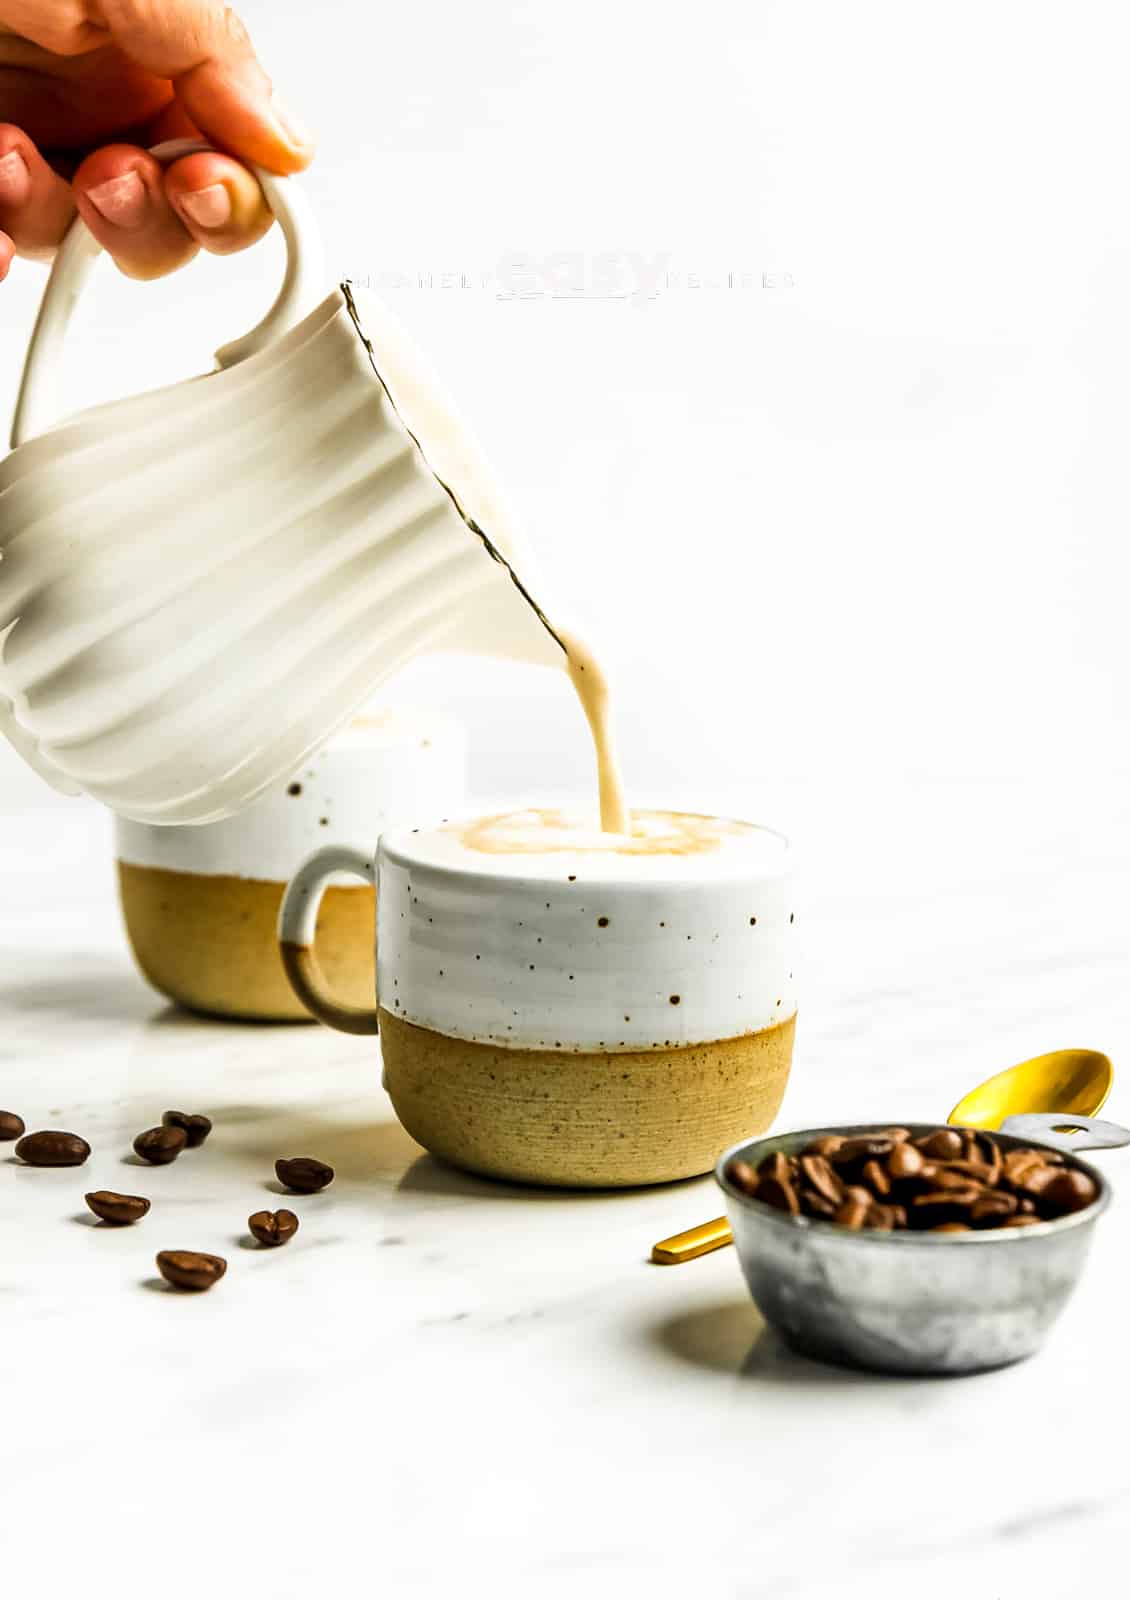 Photo of a hand pouring oat milk from a small white pitcher into a mug filled with coffee. There is a measuring cup filled with coffee beans and a gold spoon in the foreground and a mug in the background. 